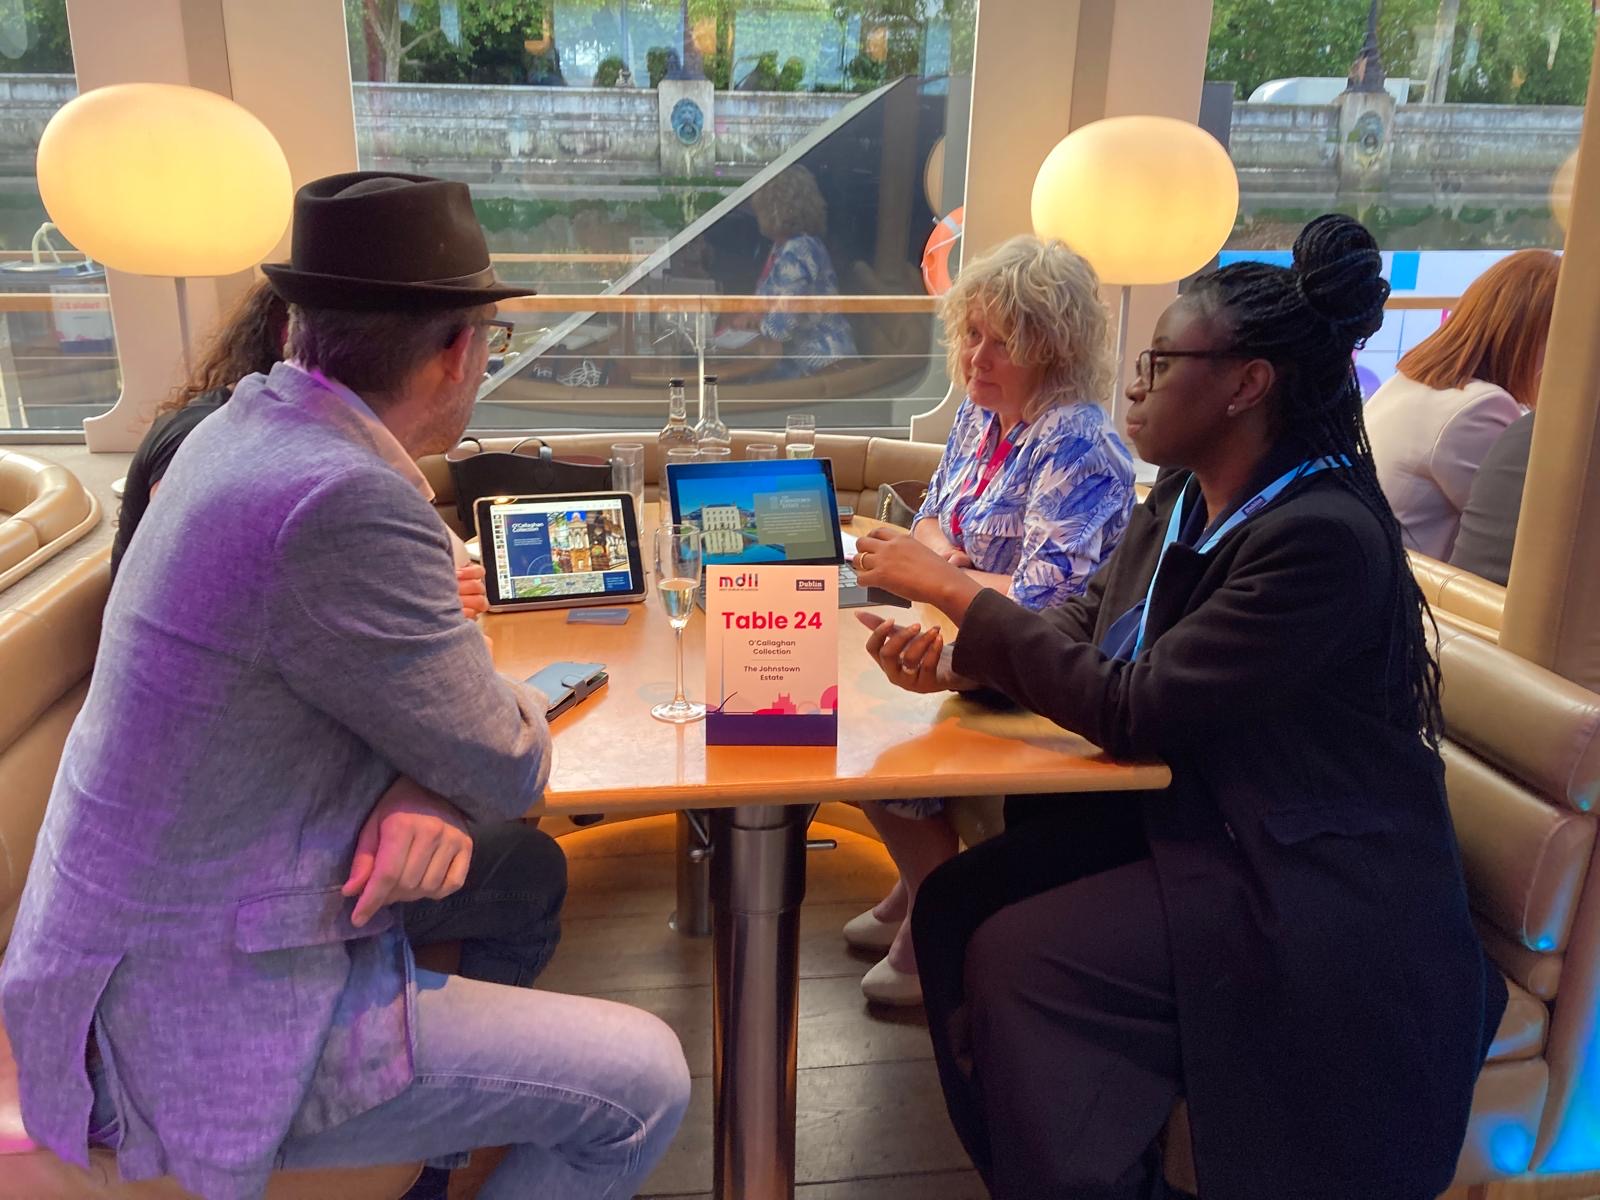 Snapshot of four people meeting at a diner during the Meet Dublin event in London